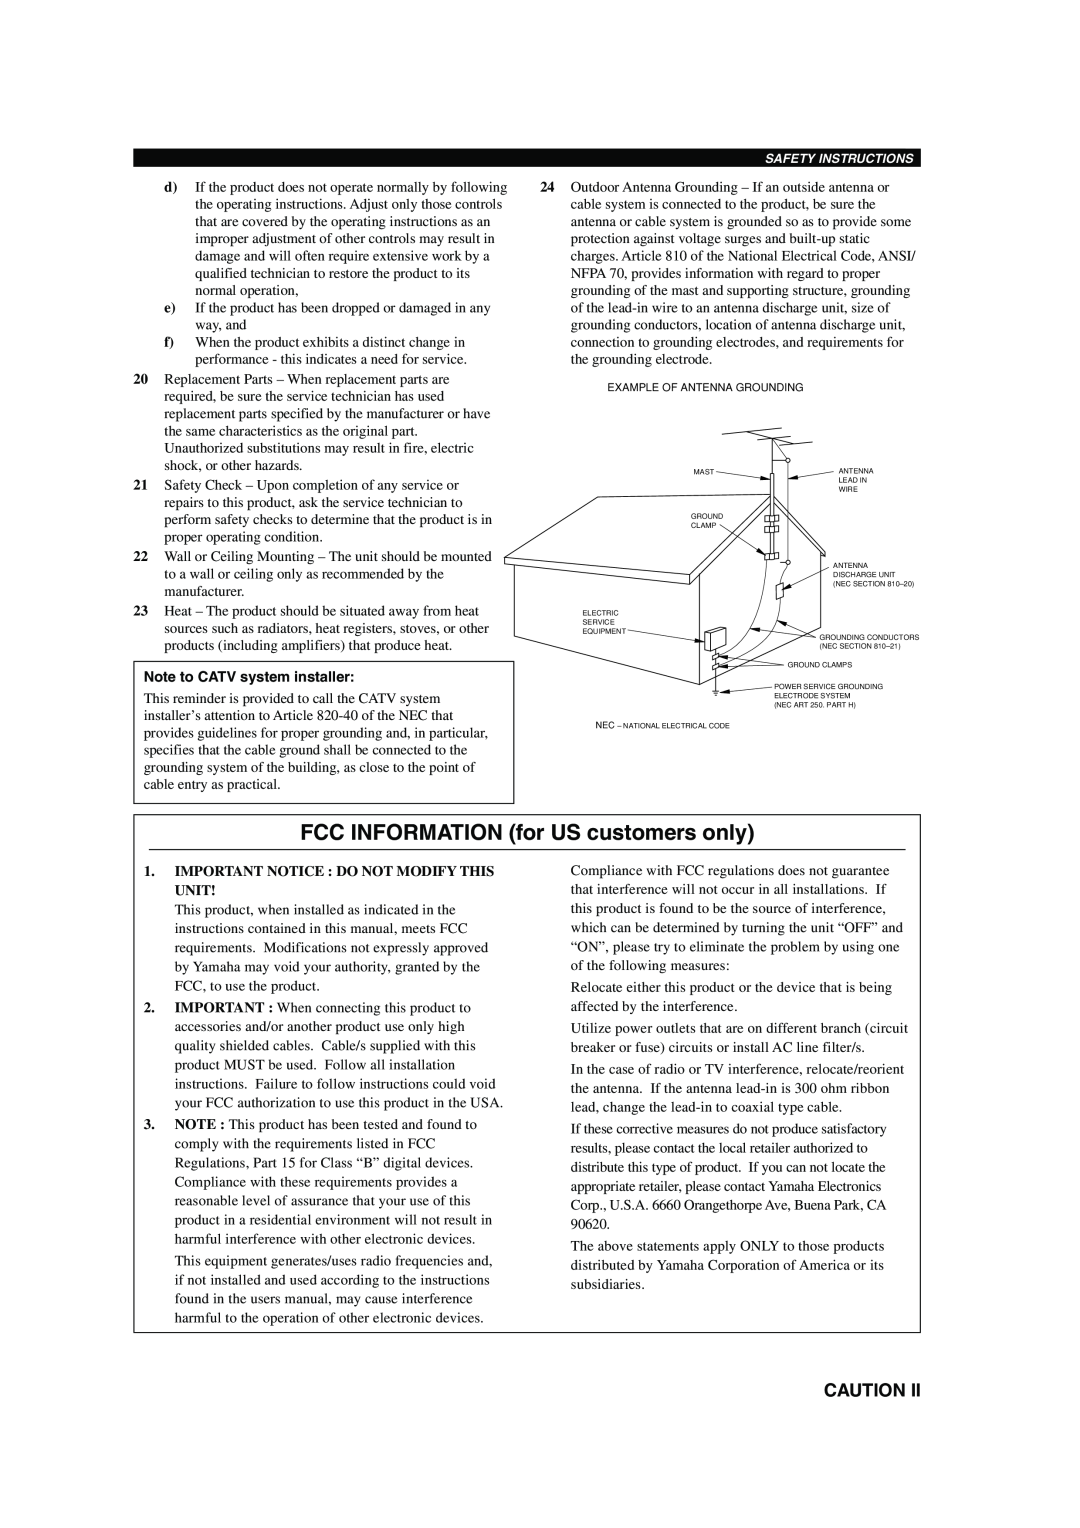 Yamaha HTR-5560 owner manual FCC INFORMATION for US customers only, Note to CATV system installer 